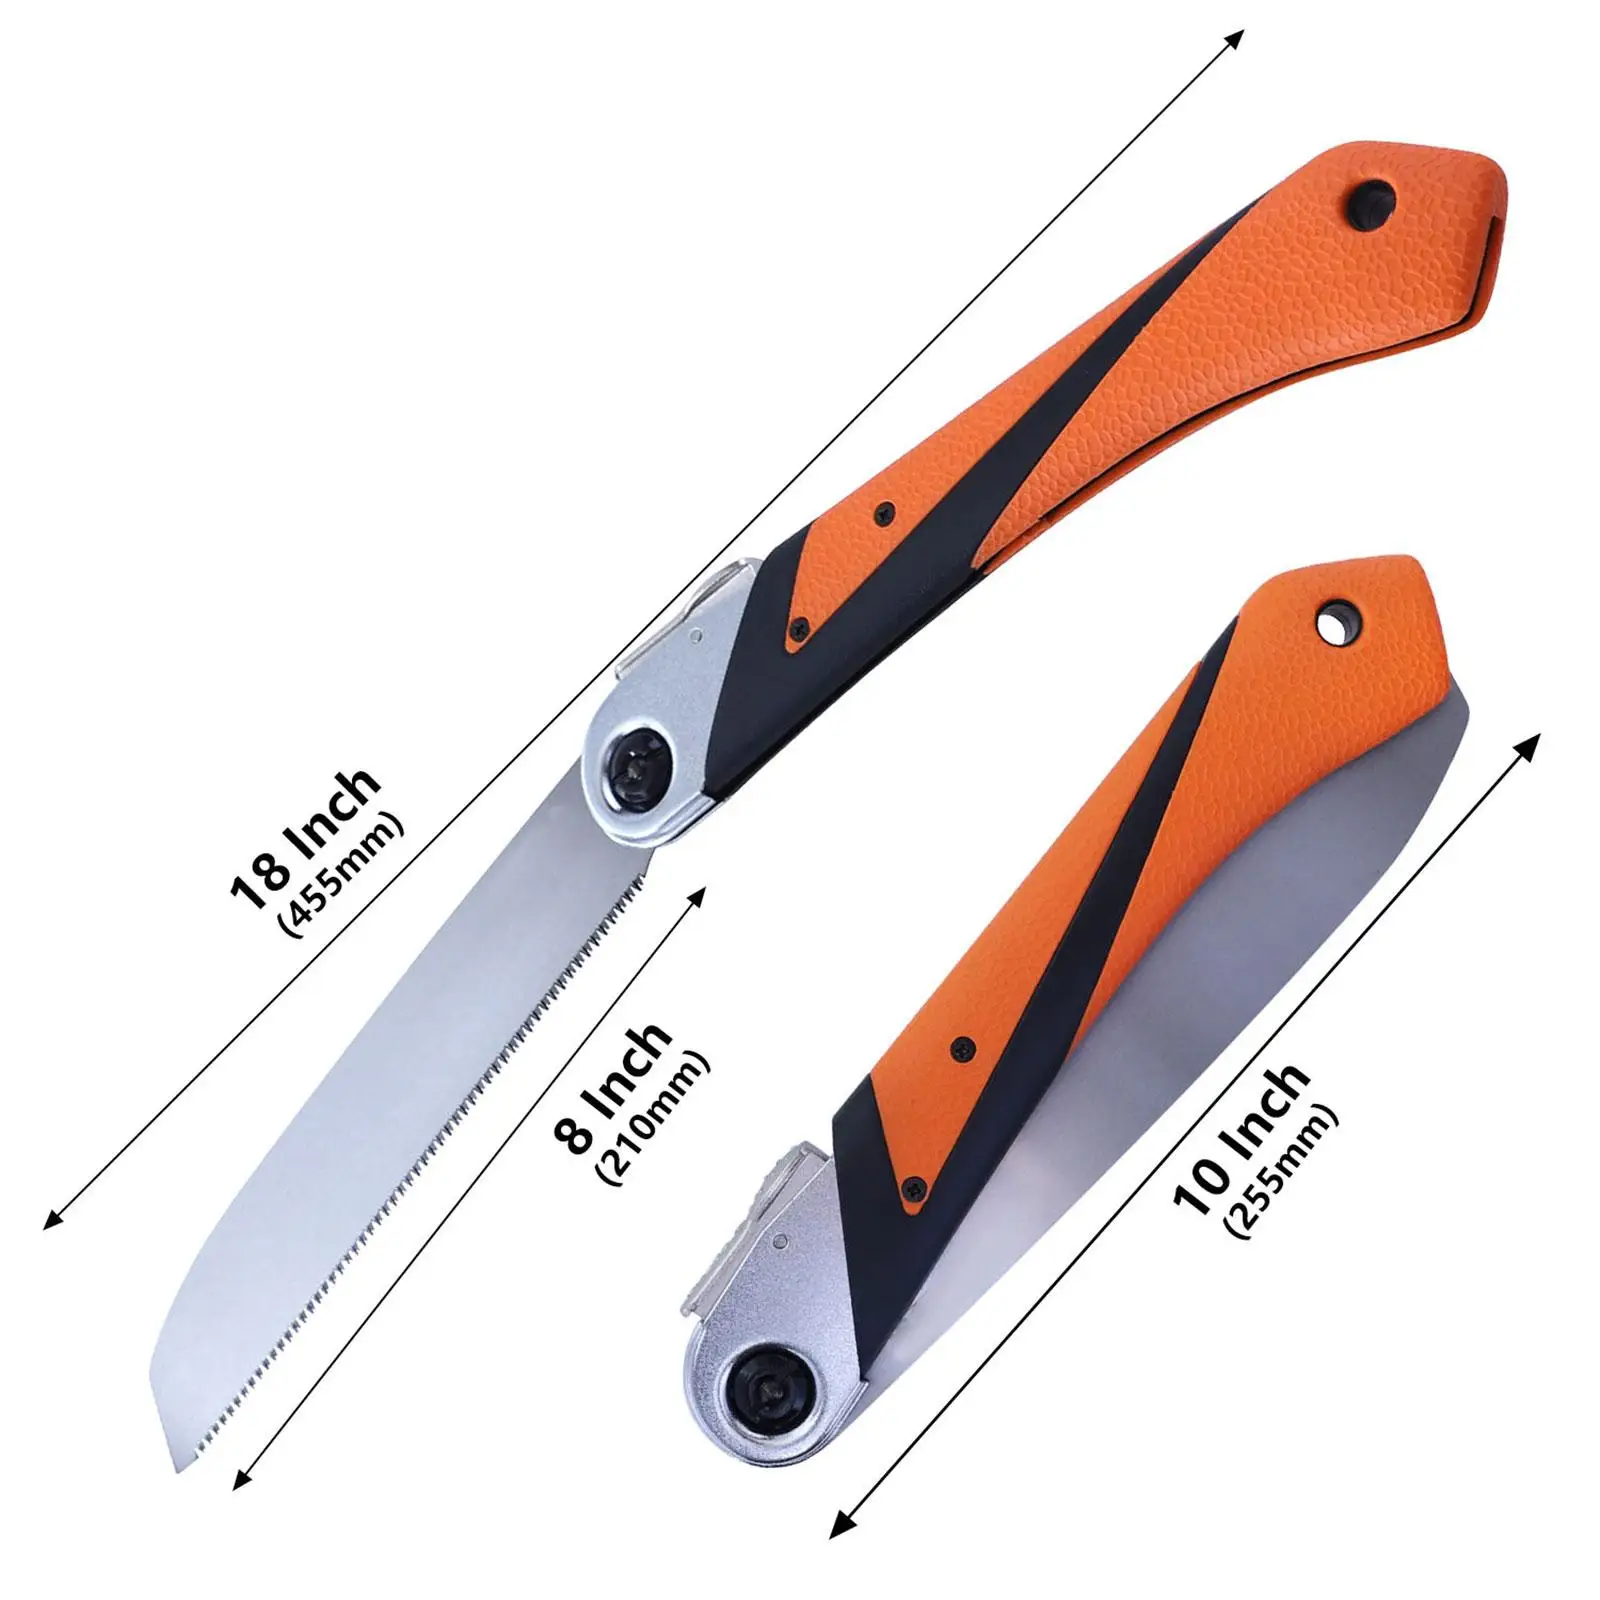 Folding Saw Quick Sawing Cutting Sturdy Three Sided Grinding Saw Hand Saw for Carpenter Garden Hunting Hiking Household